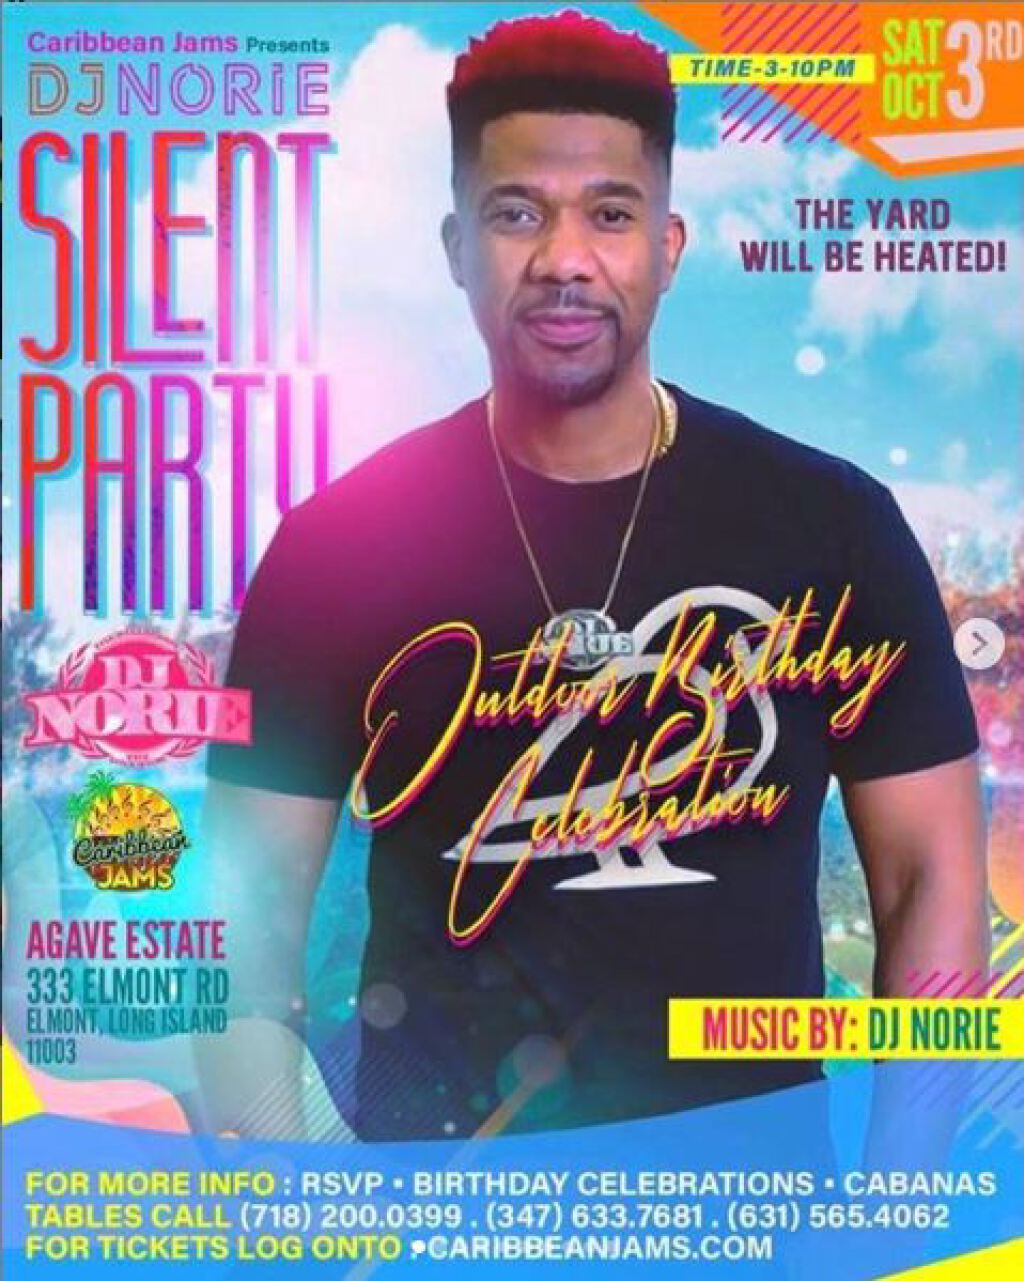 DJ Norie Silent Birthday Party flyer or graphic.